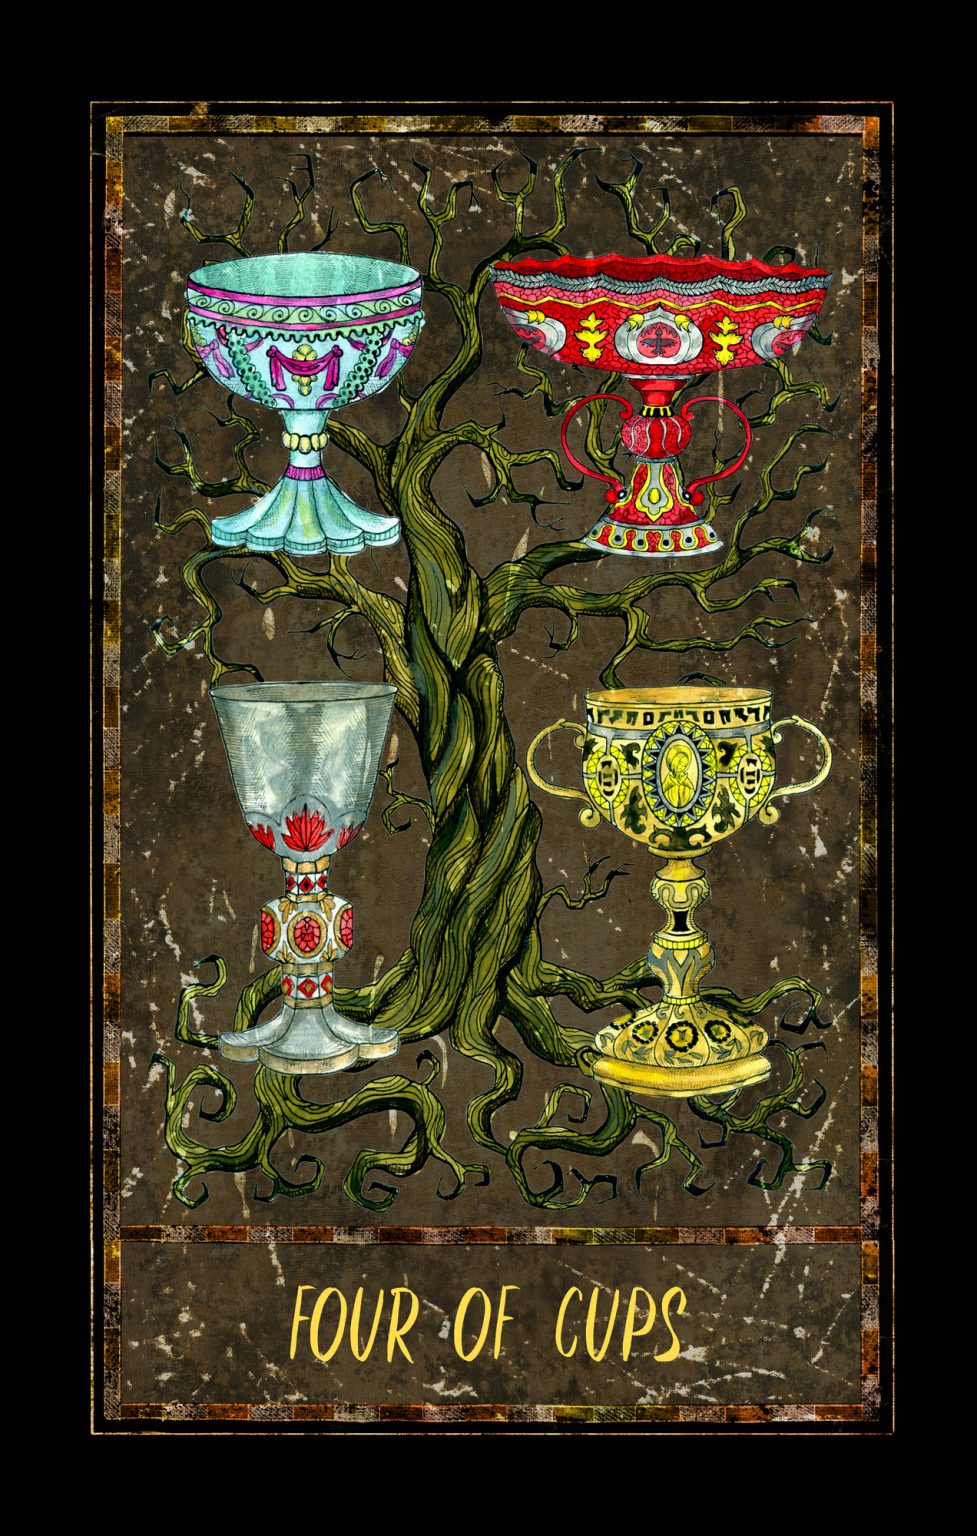 4 of cups astrology is 8th house